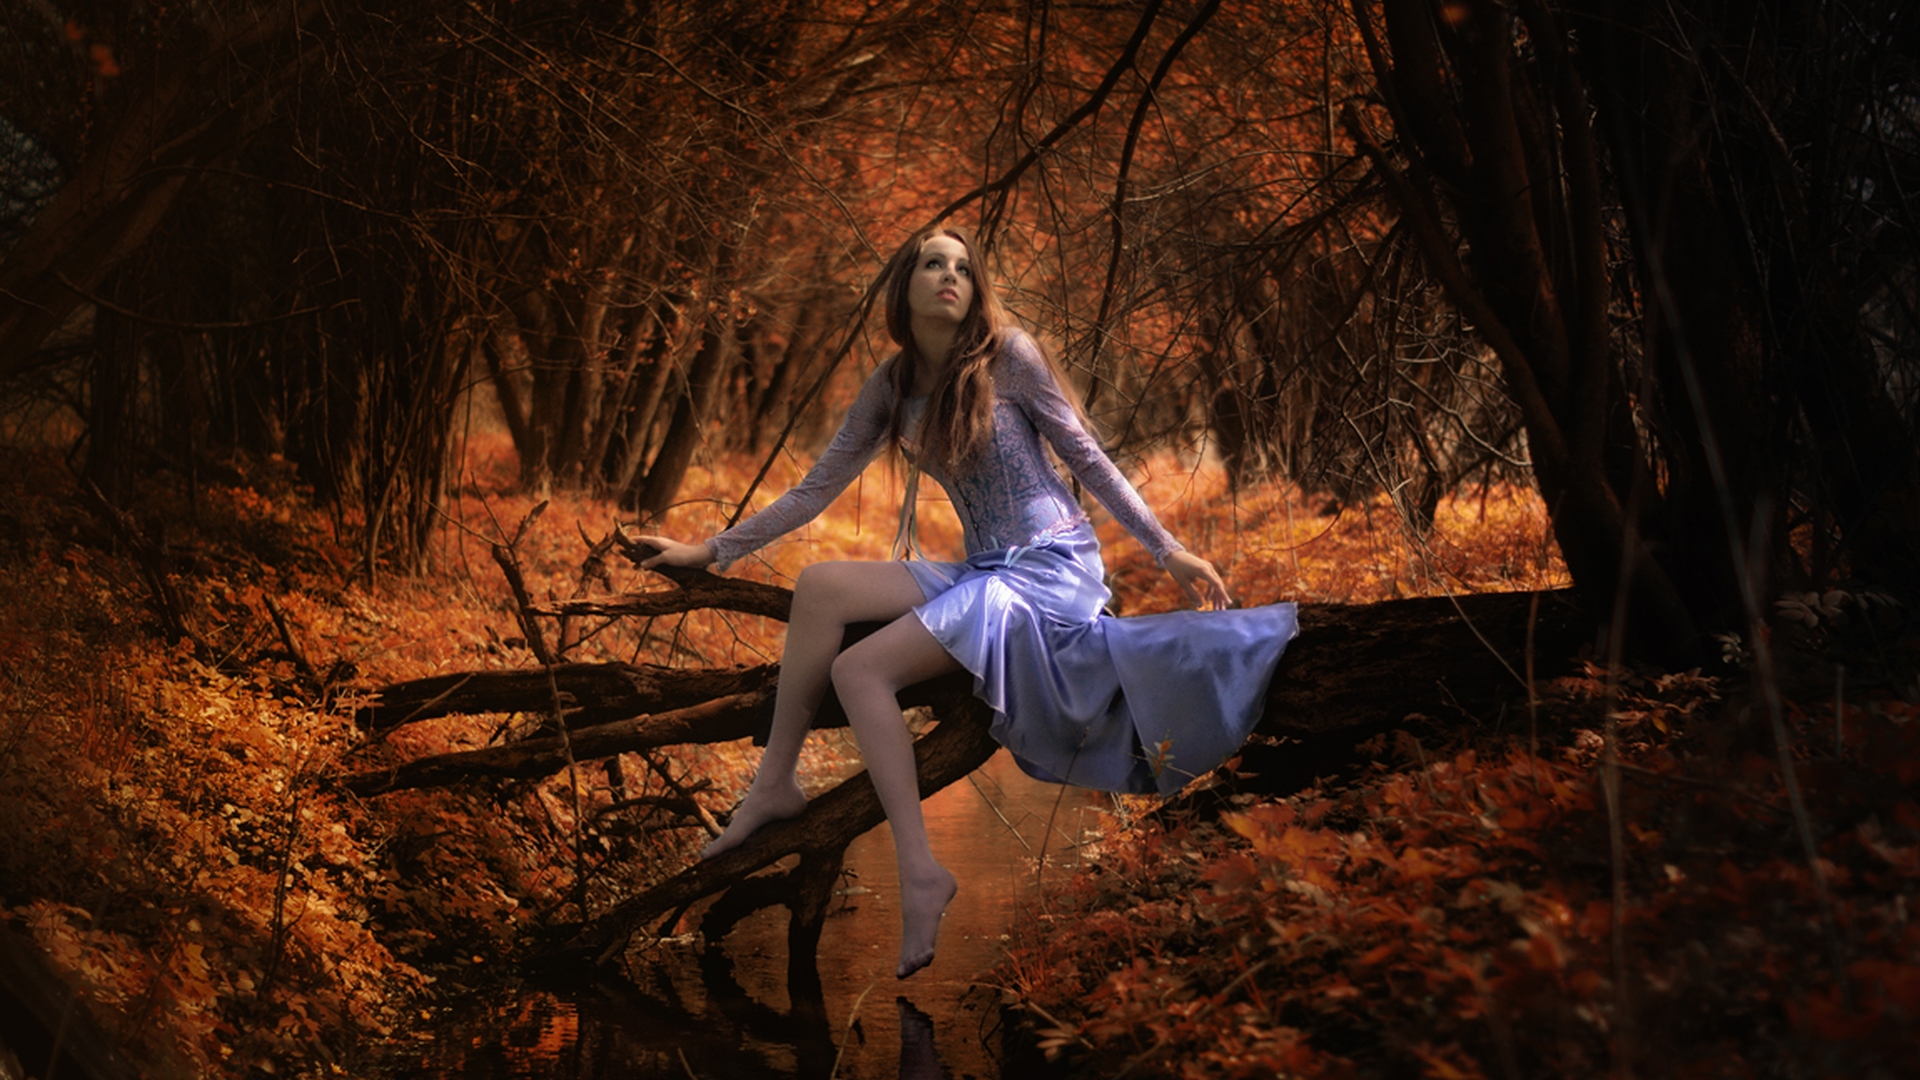 Girl in autumn forest wallpaper and image